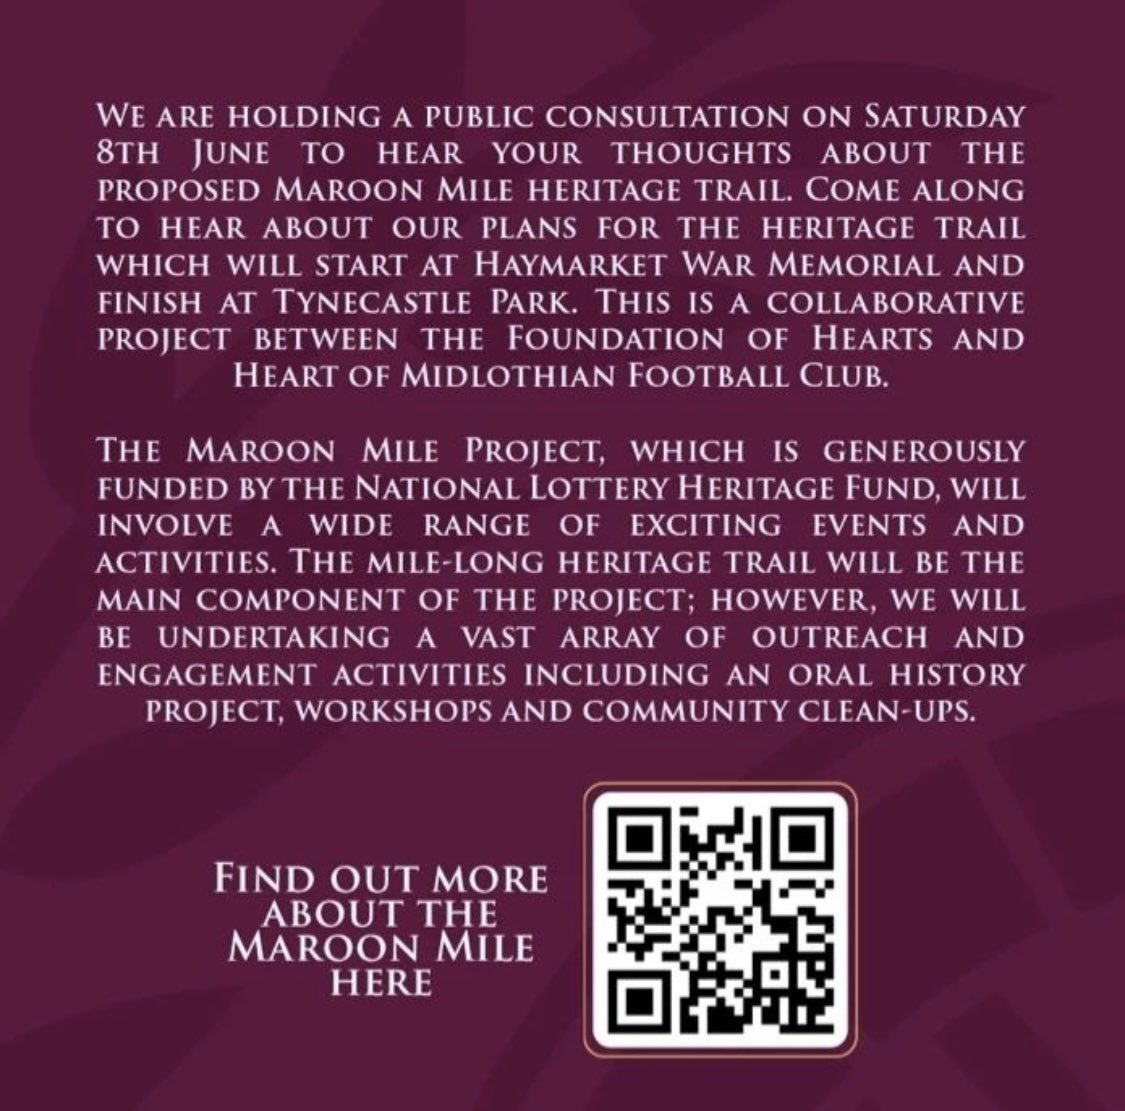 Public Consultation: Maroon Mile 8th June 12pm -3pm at the HMFC Museum   Come along to hear about our plans for the heritage trail which will start at Haymarket War Memorial and finish at Tynecastle Park. heartsfc.co.uk/blogs/news/mar…